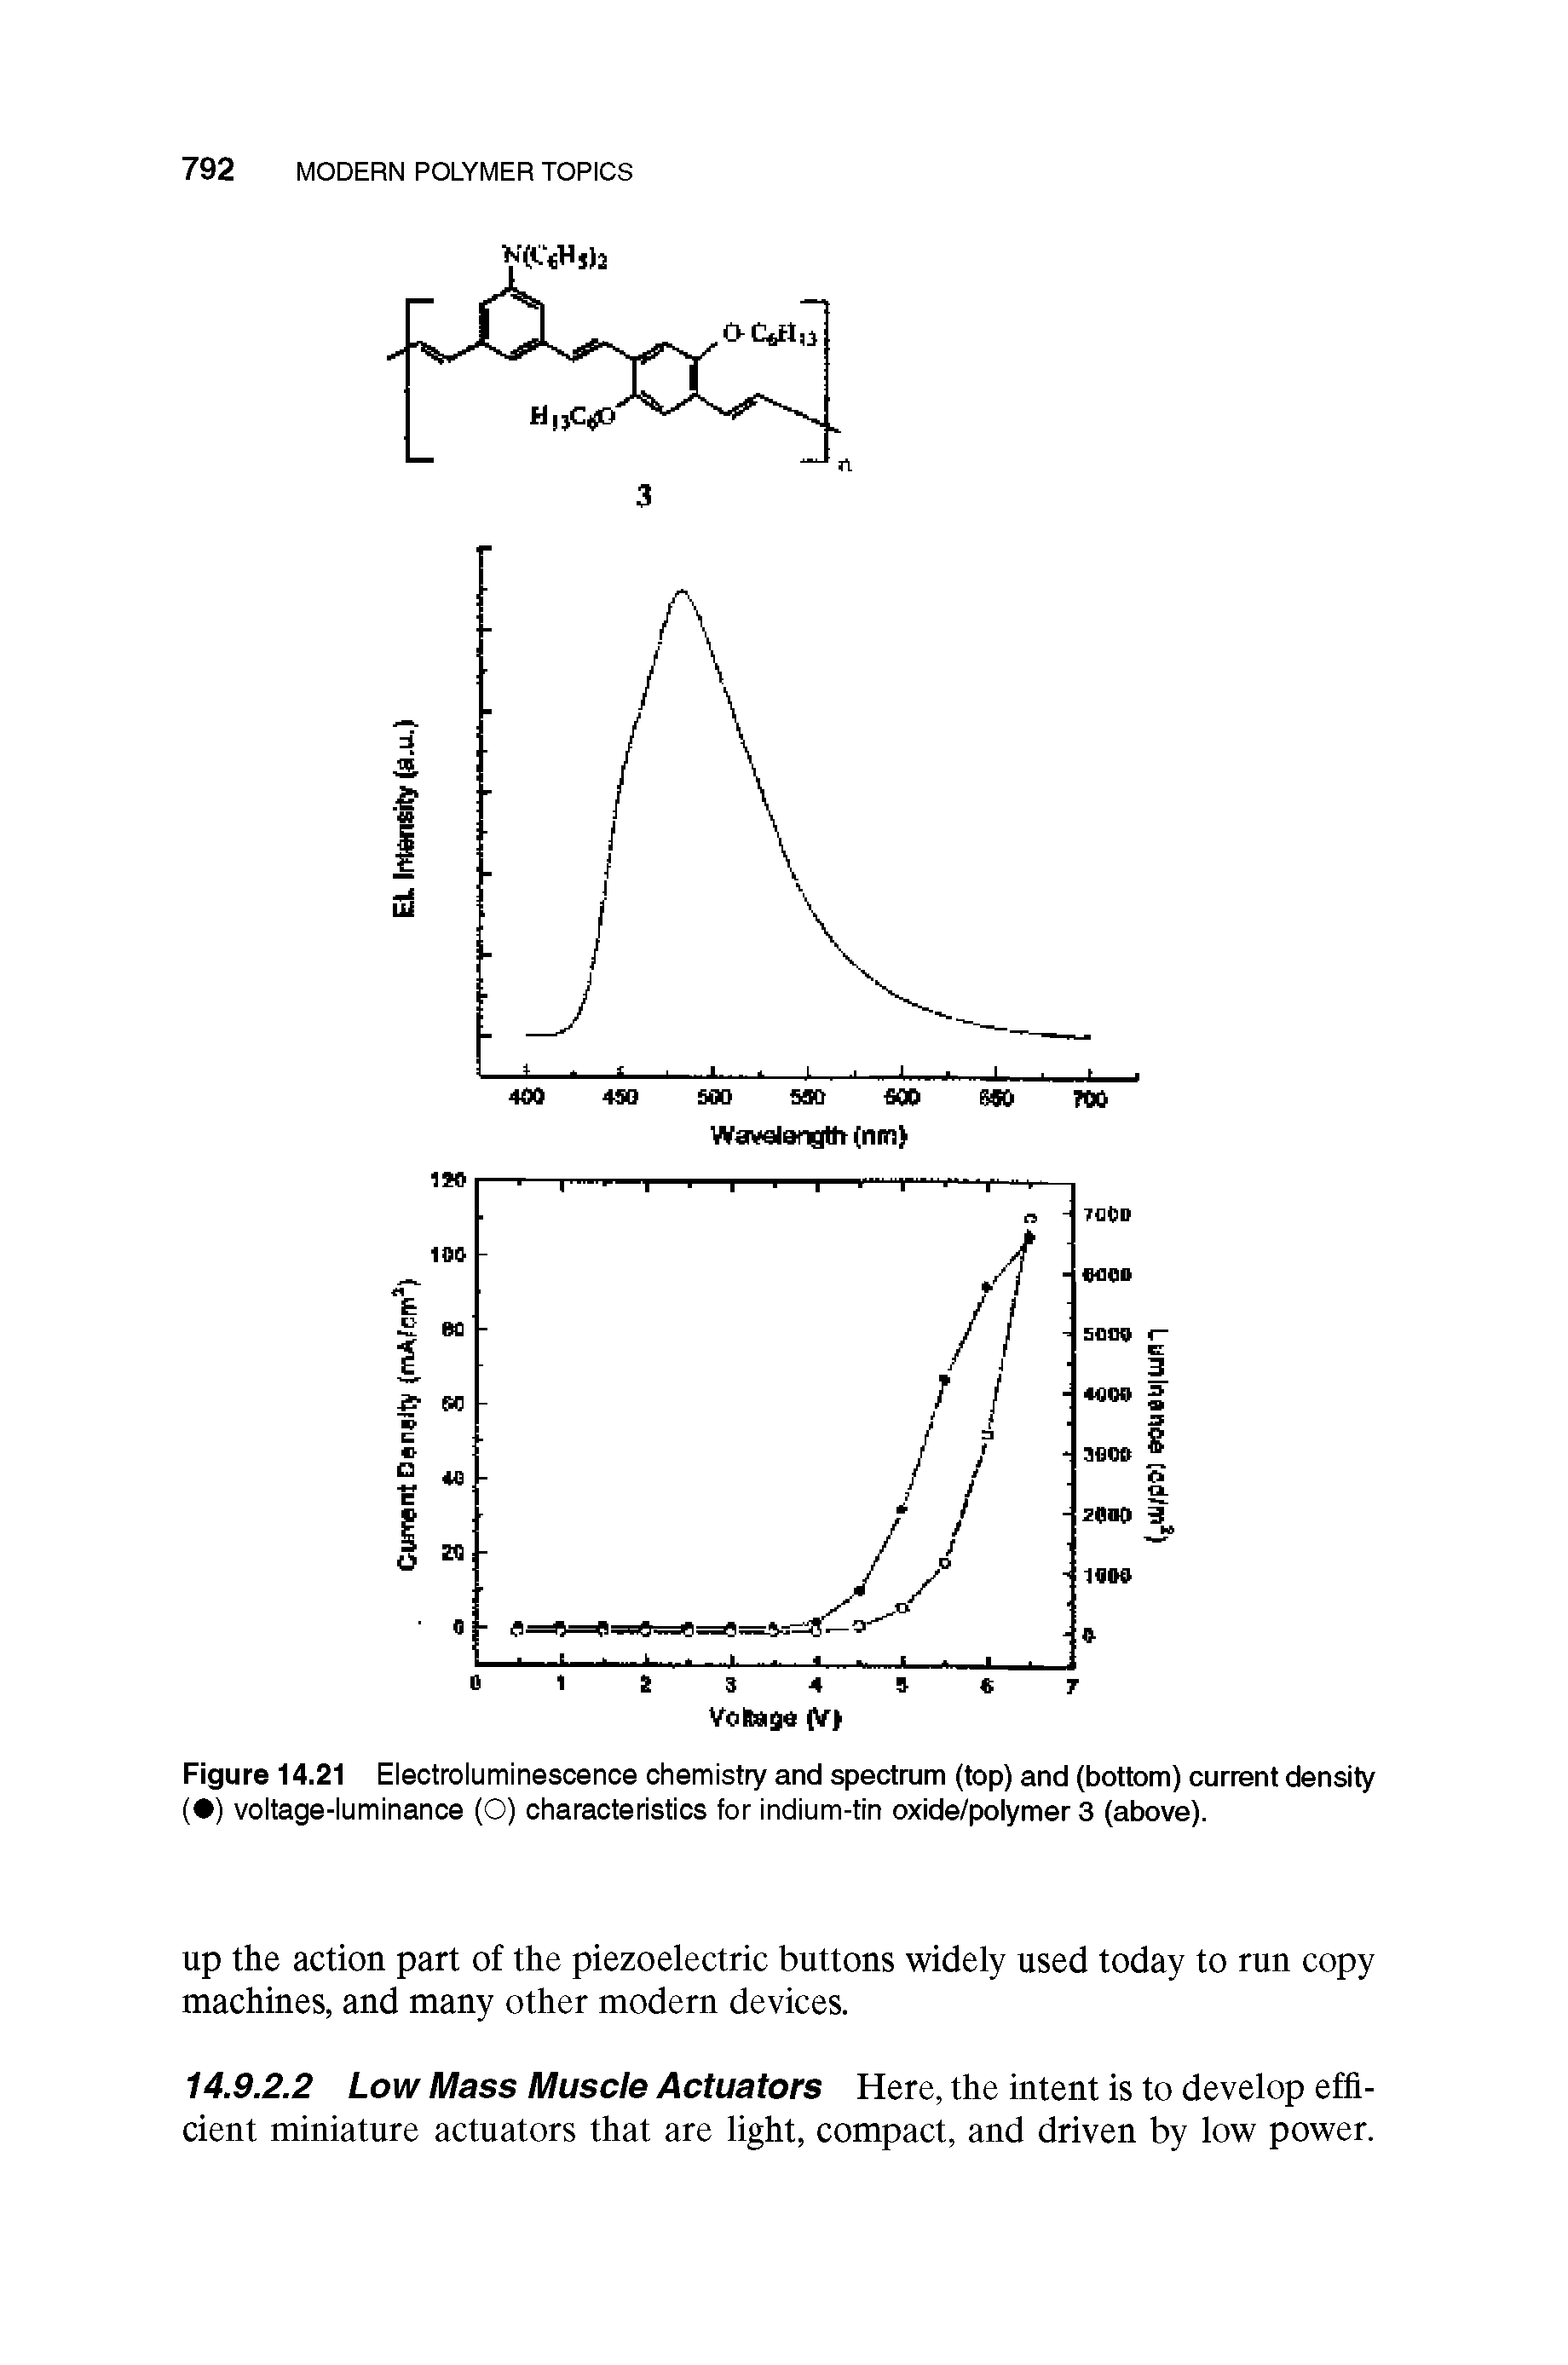 Figure 14.21 Eleotroluminesoenoe chemistry and spectrum (top) and (bottom) current density ( ) voltage-luminance (O) characteristics for indium-tin oxide/polymer 3 (above).